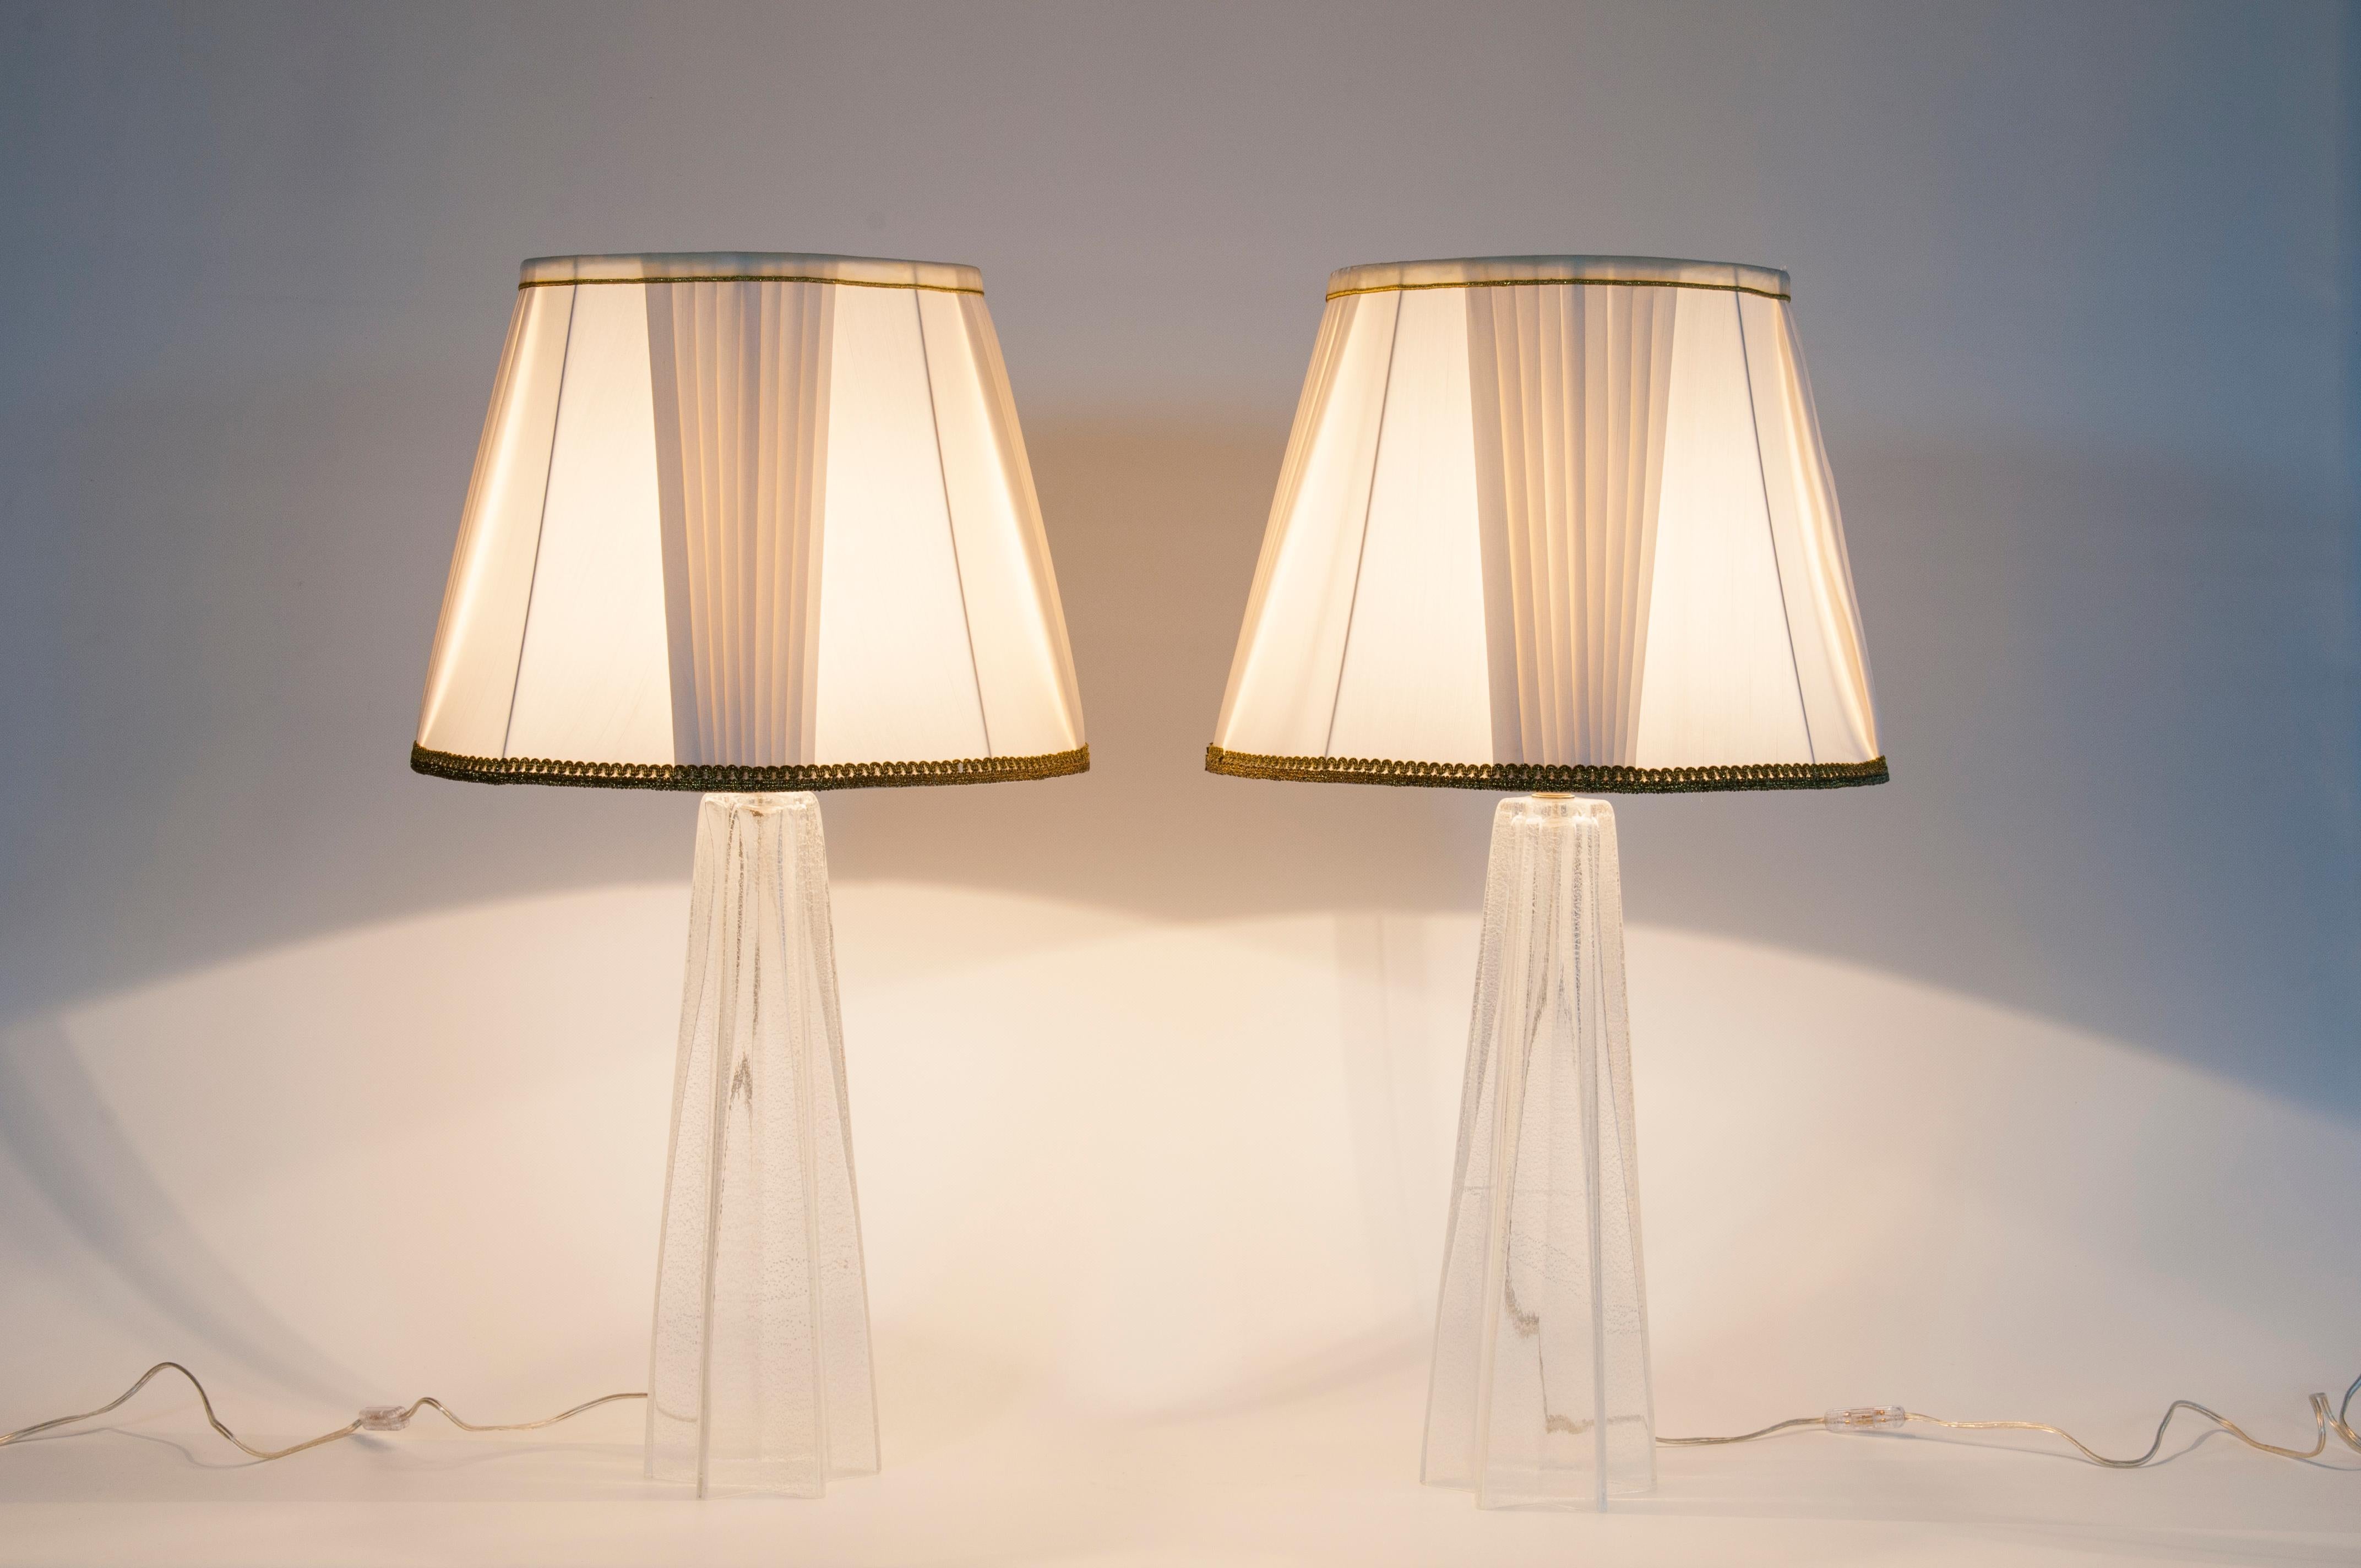 Pair of Murano Glass Table Lamps Star shaped Silver in Crystal color Italy 1980s For Sale 4